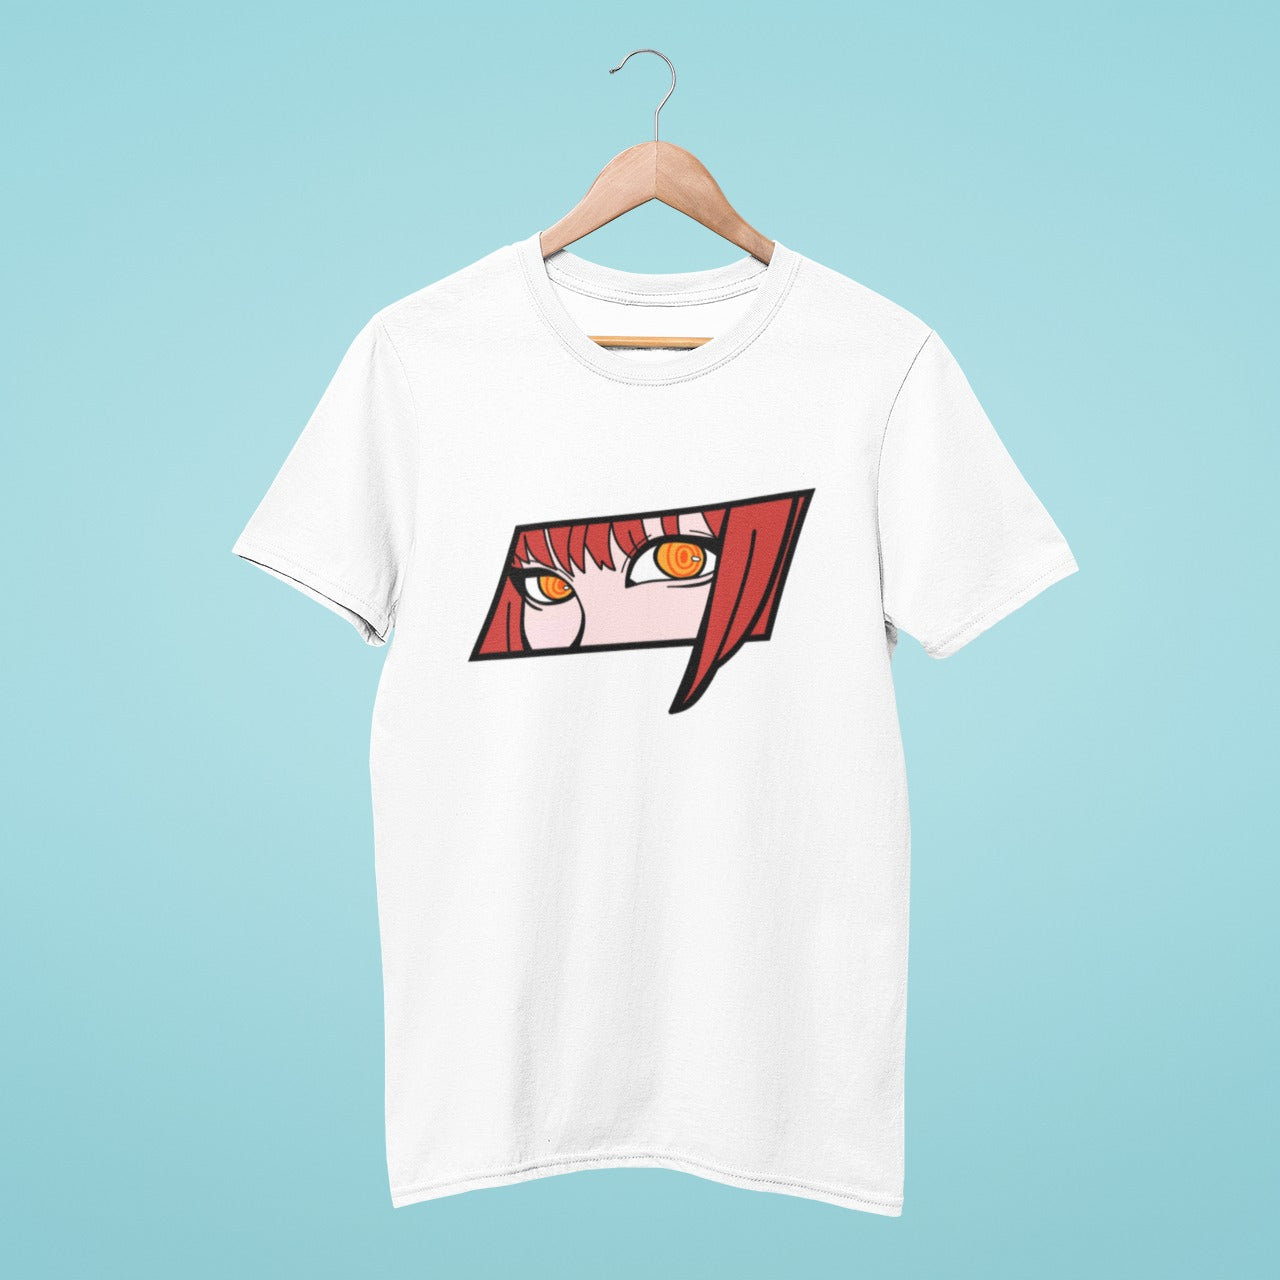 Get ready to showcase your love for Chainsaw Man with our sleek white t-shirt featuring Makima staring out with only her captivating eyes visible through a parallelogram. Made with high-quality materials, this shirt offers both comfort and style. Perfect for anime conventions and casual outings, get yours today and add some sophistication to your wardrobe!